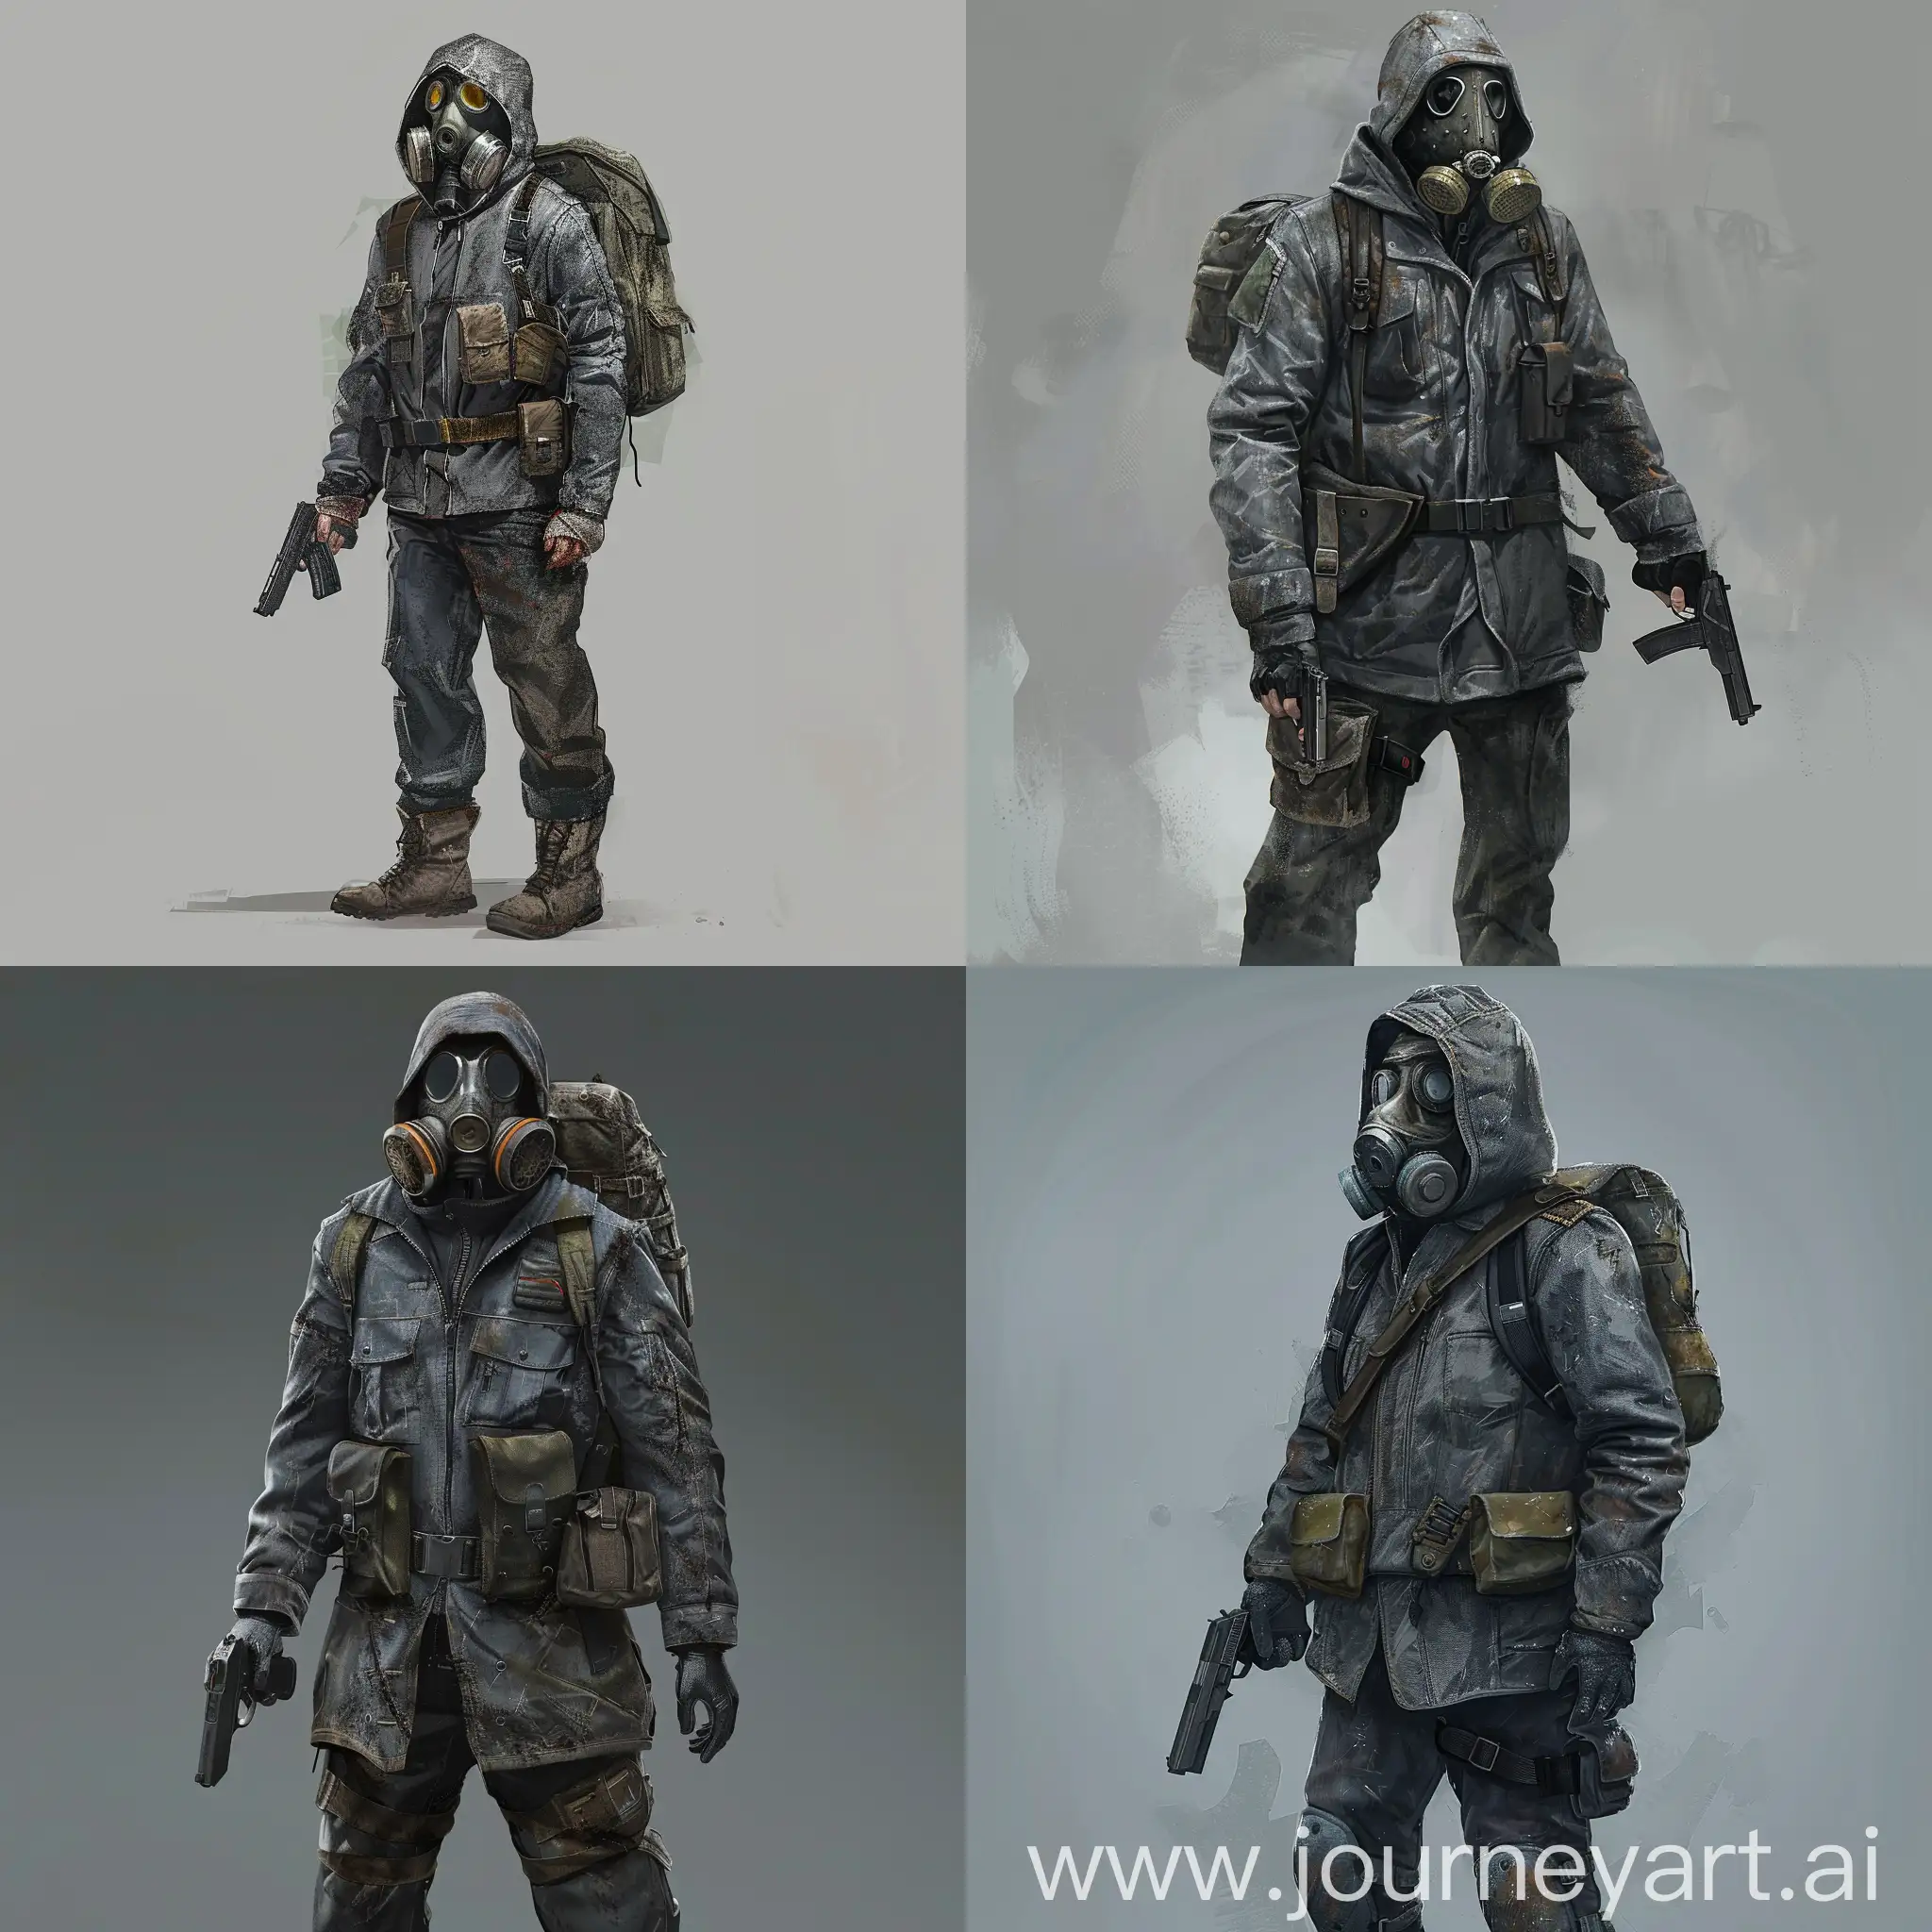 Stalker character concept art full body, gasmask, dirty gray old jacket, small backpack on the back, a belt with pouches on the waist, pistol in hand.